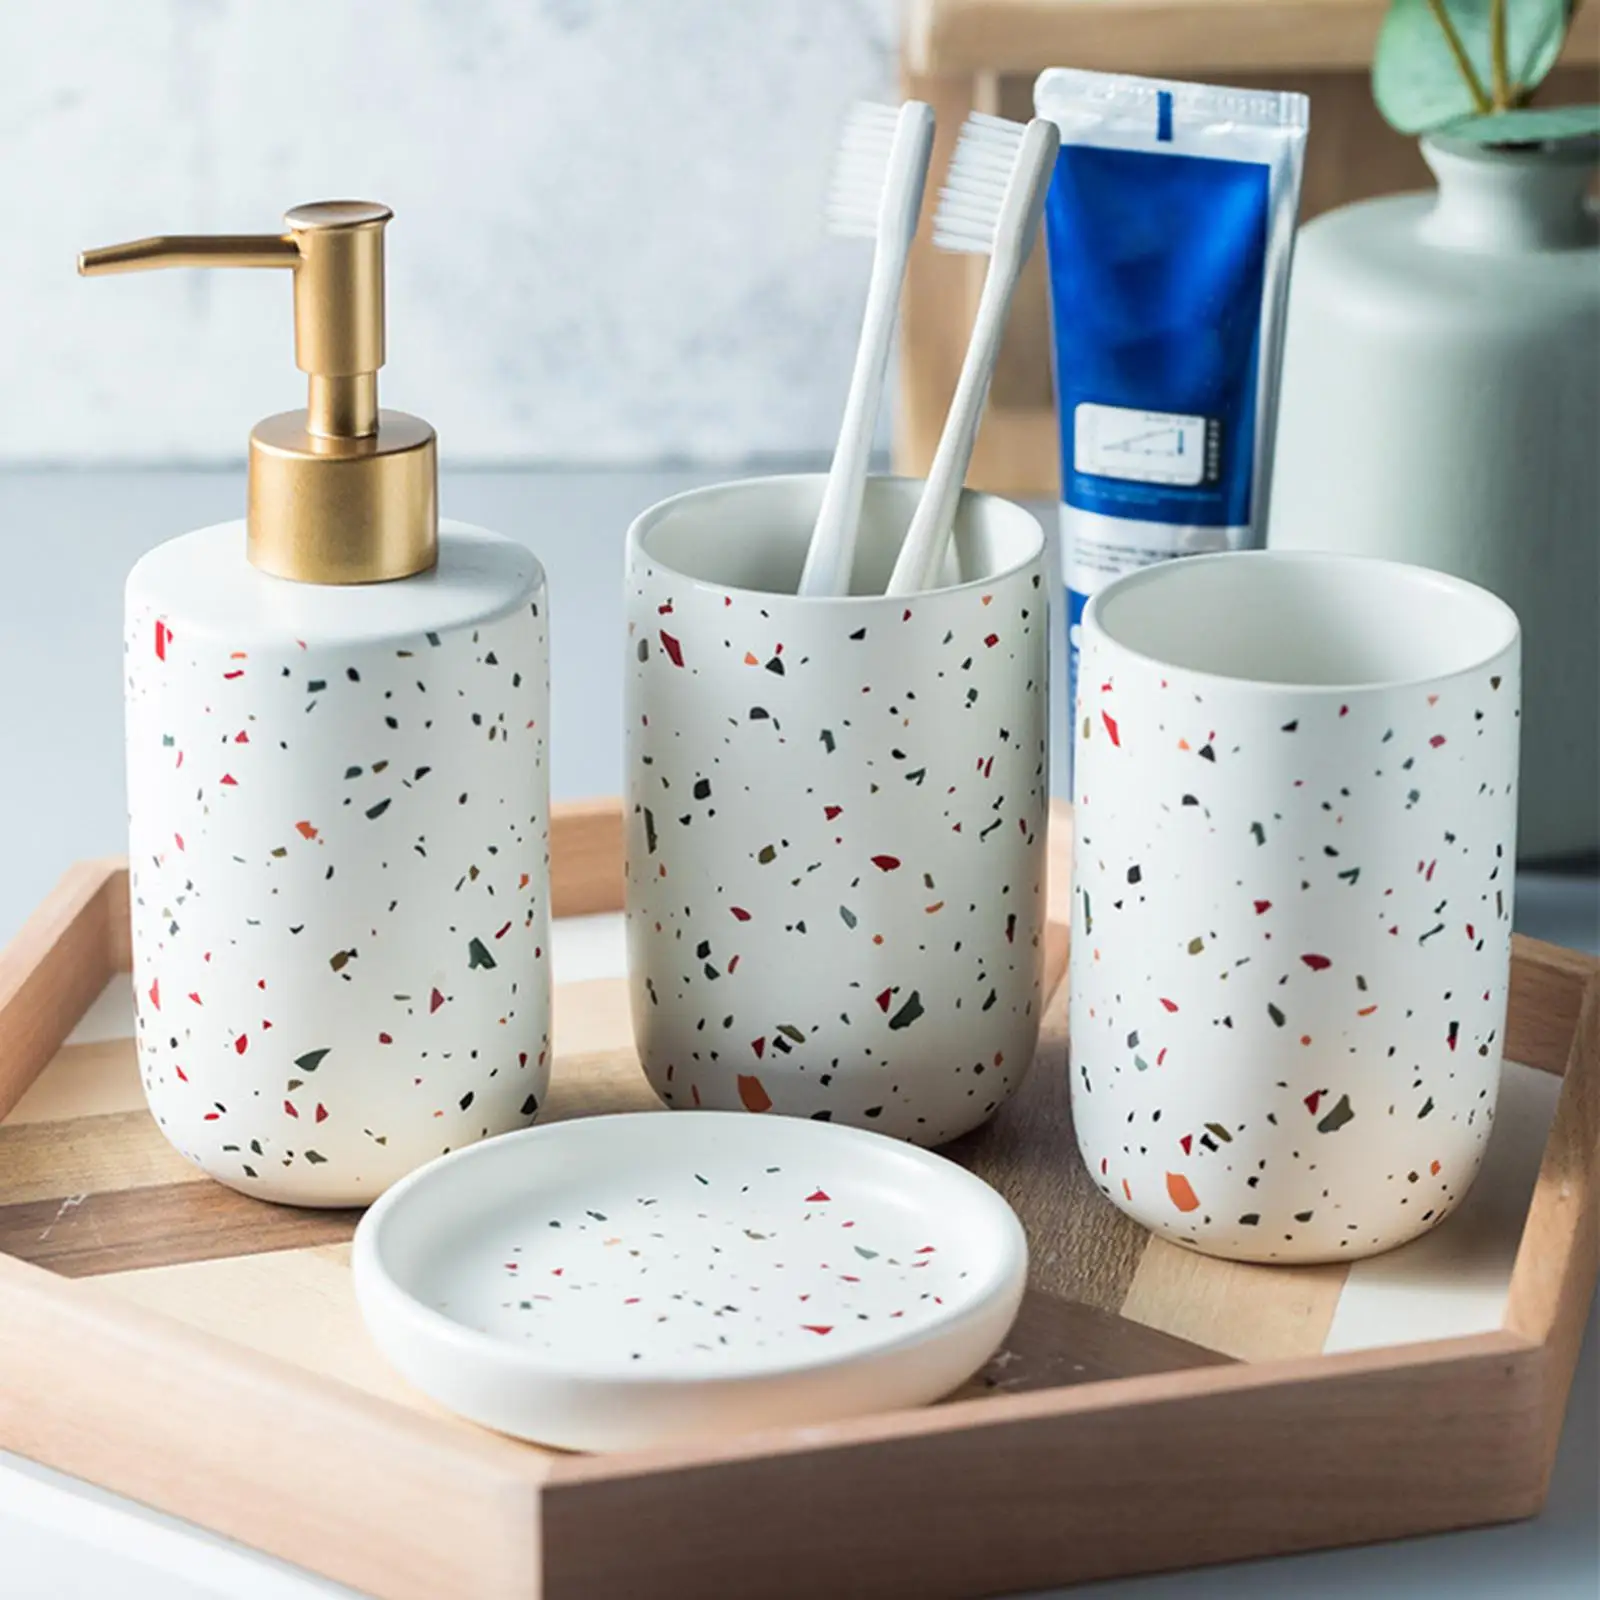 Ceramic Bathroom Accessories Set, Toothbrush Cup Soap Dish Lotion Bottle Mouth Cup Bath  Stuff for Bathroom Decoration